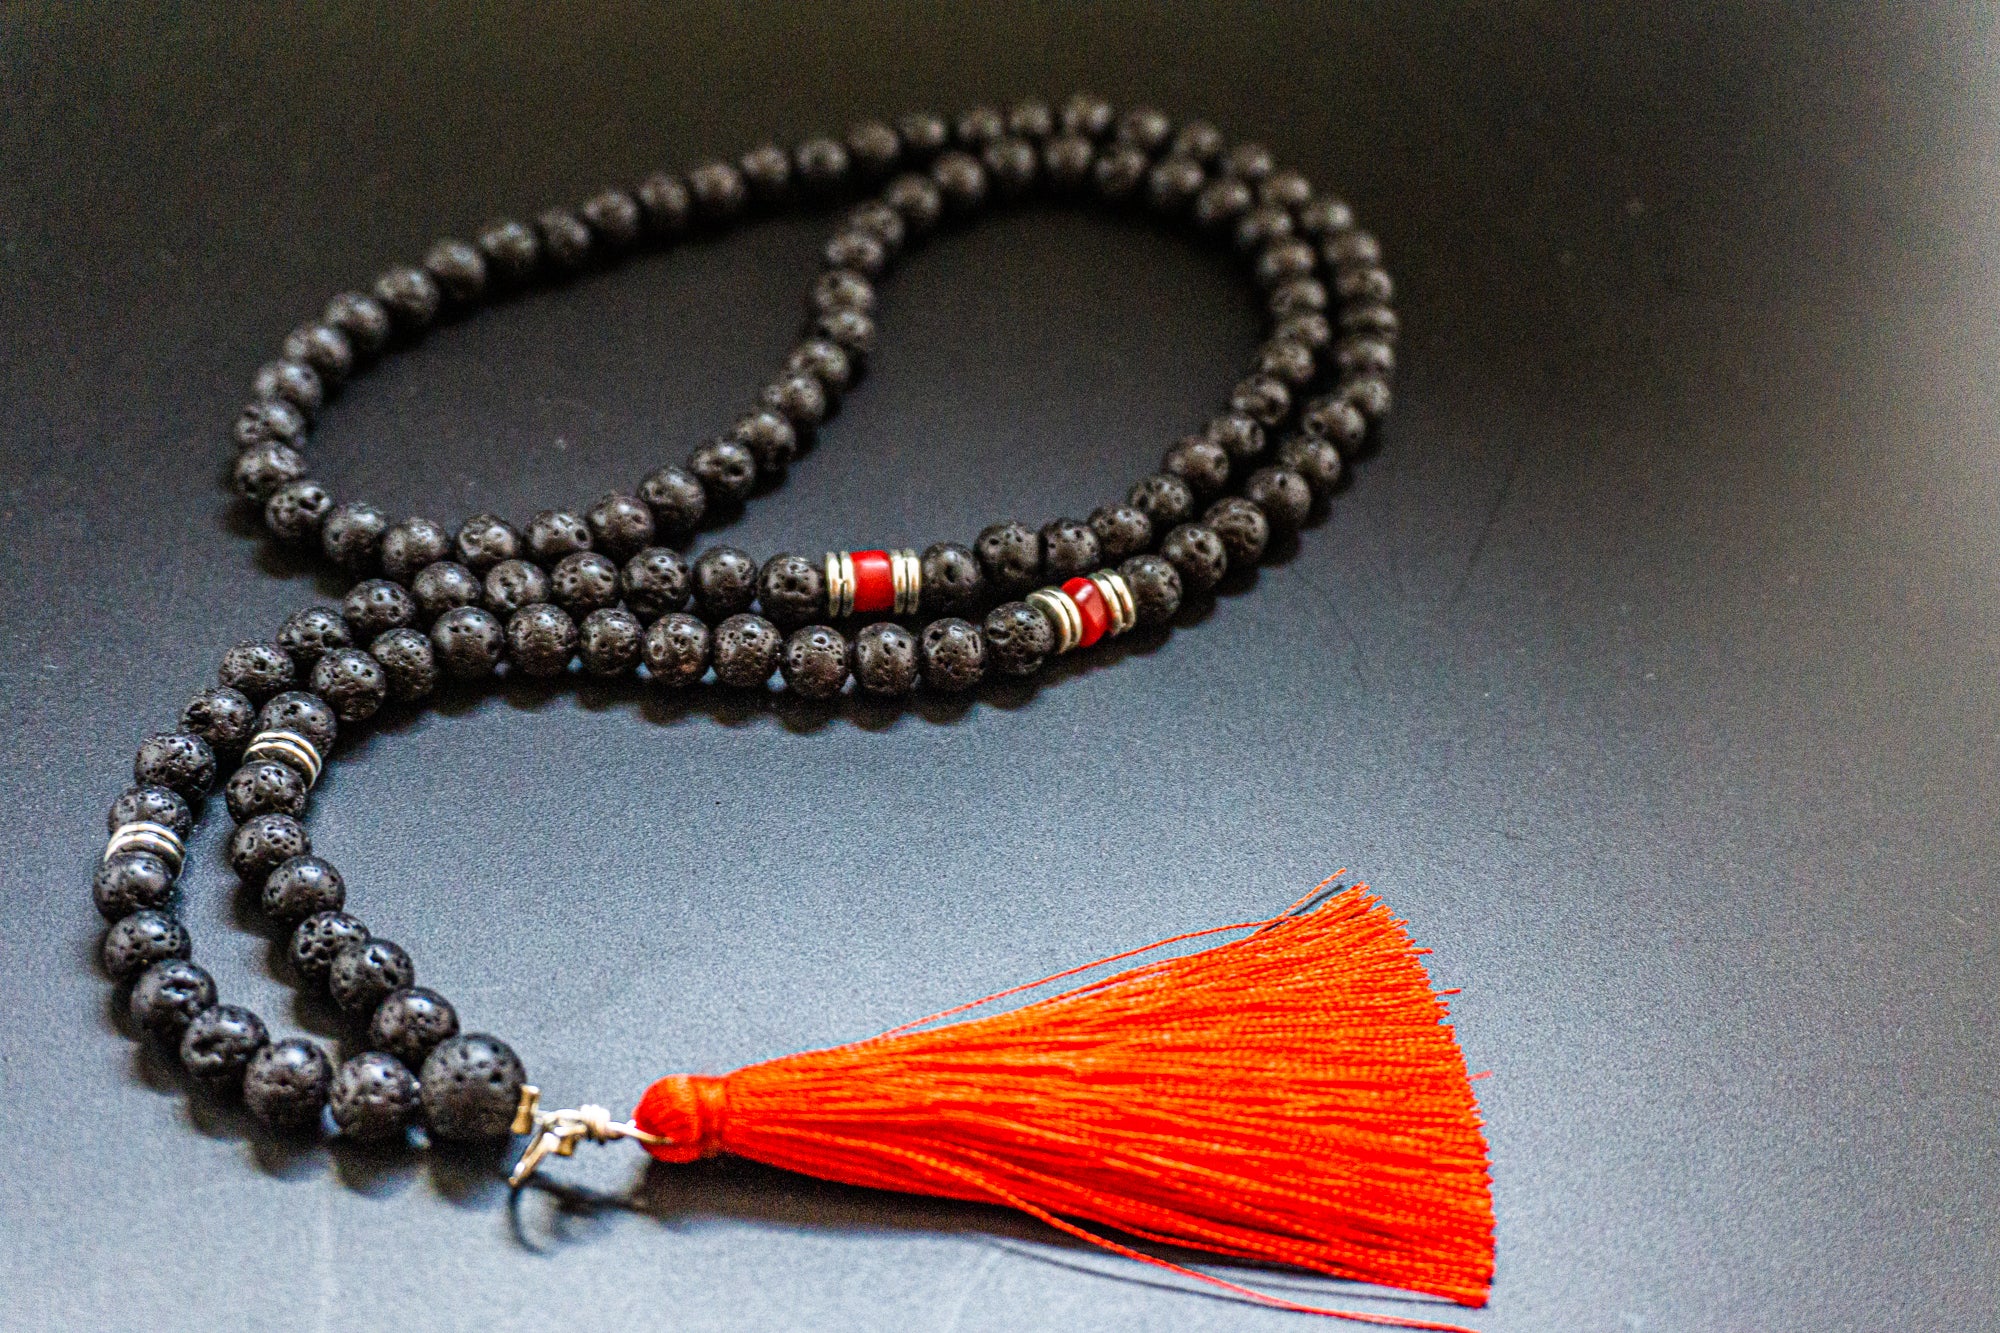 108 beads mala meditation necklace made of lava stone and red agate- wander jewellery